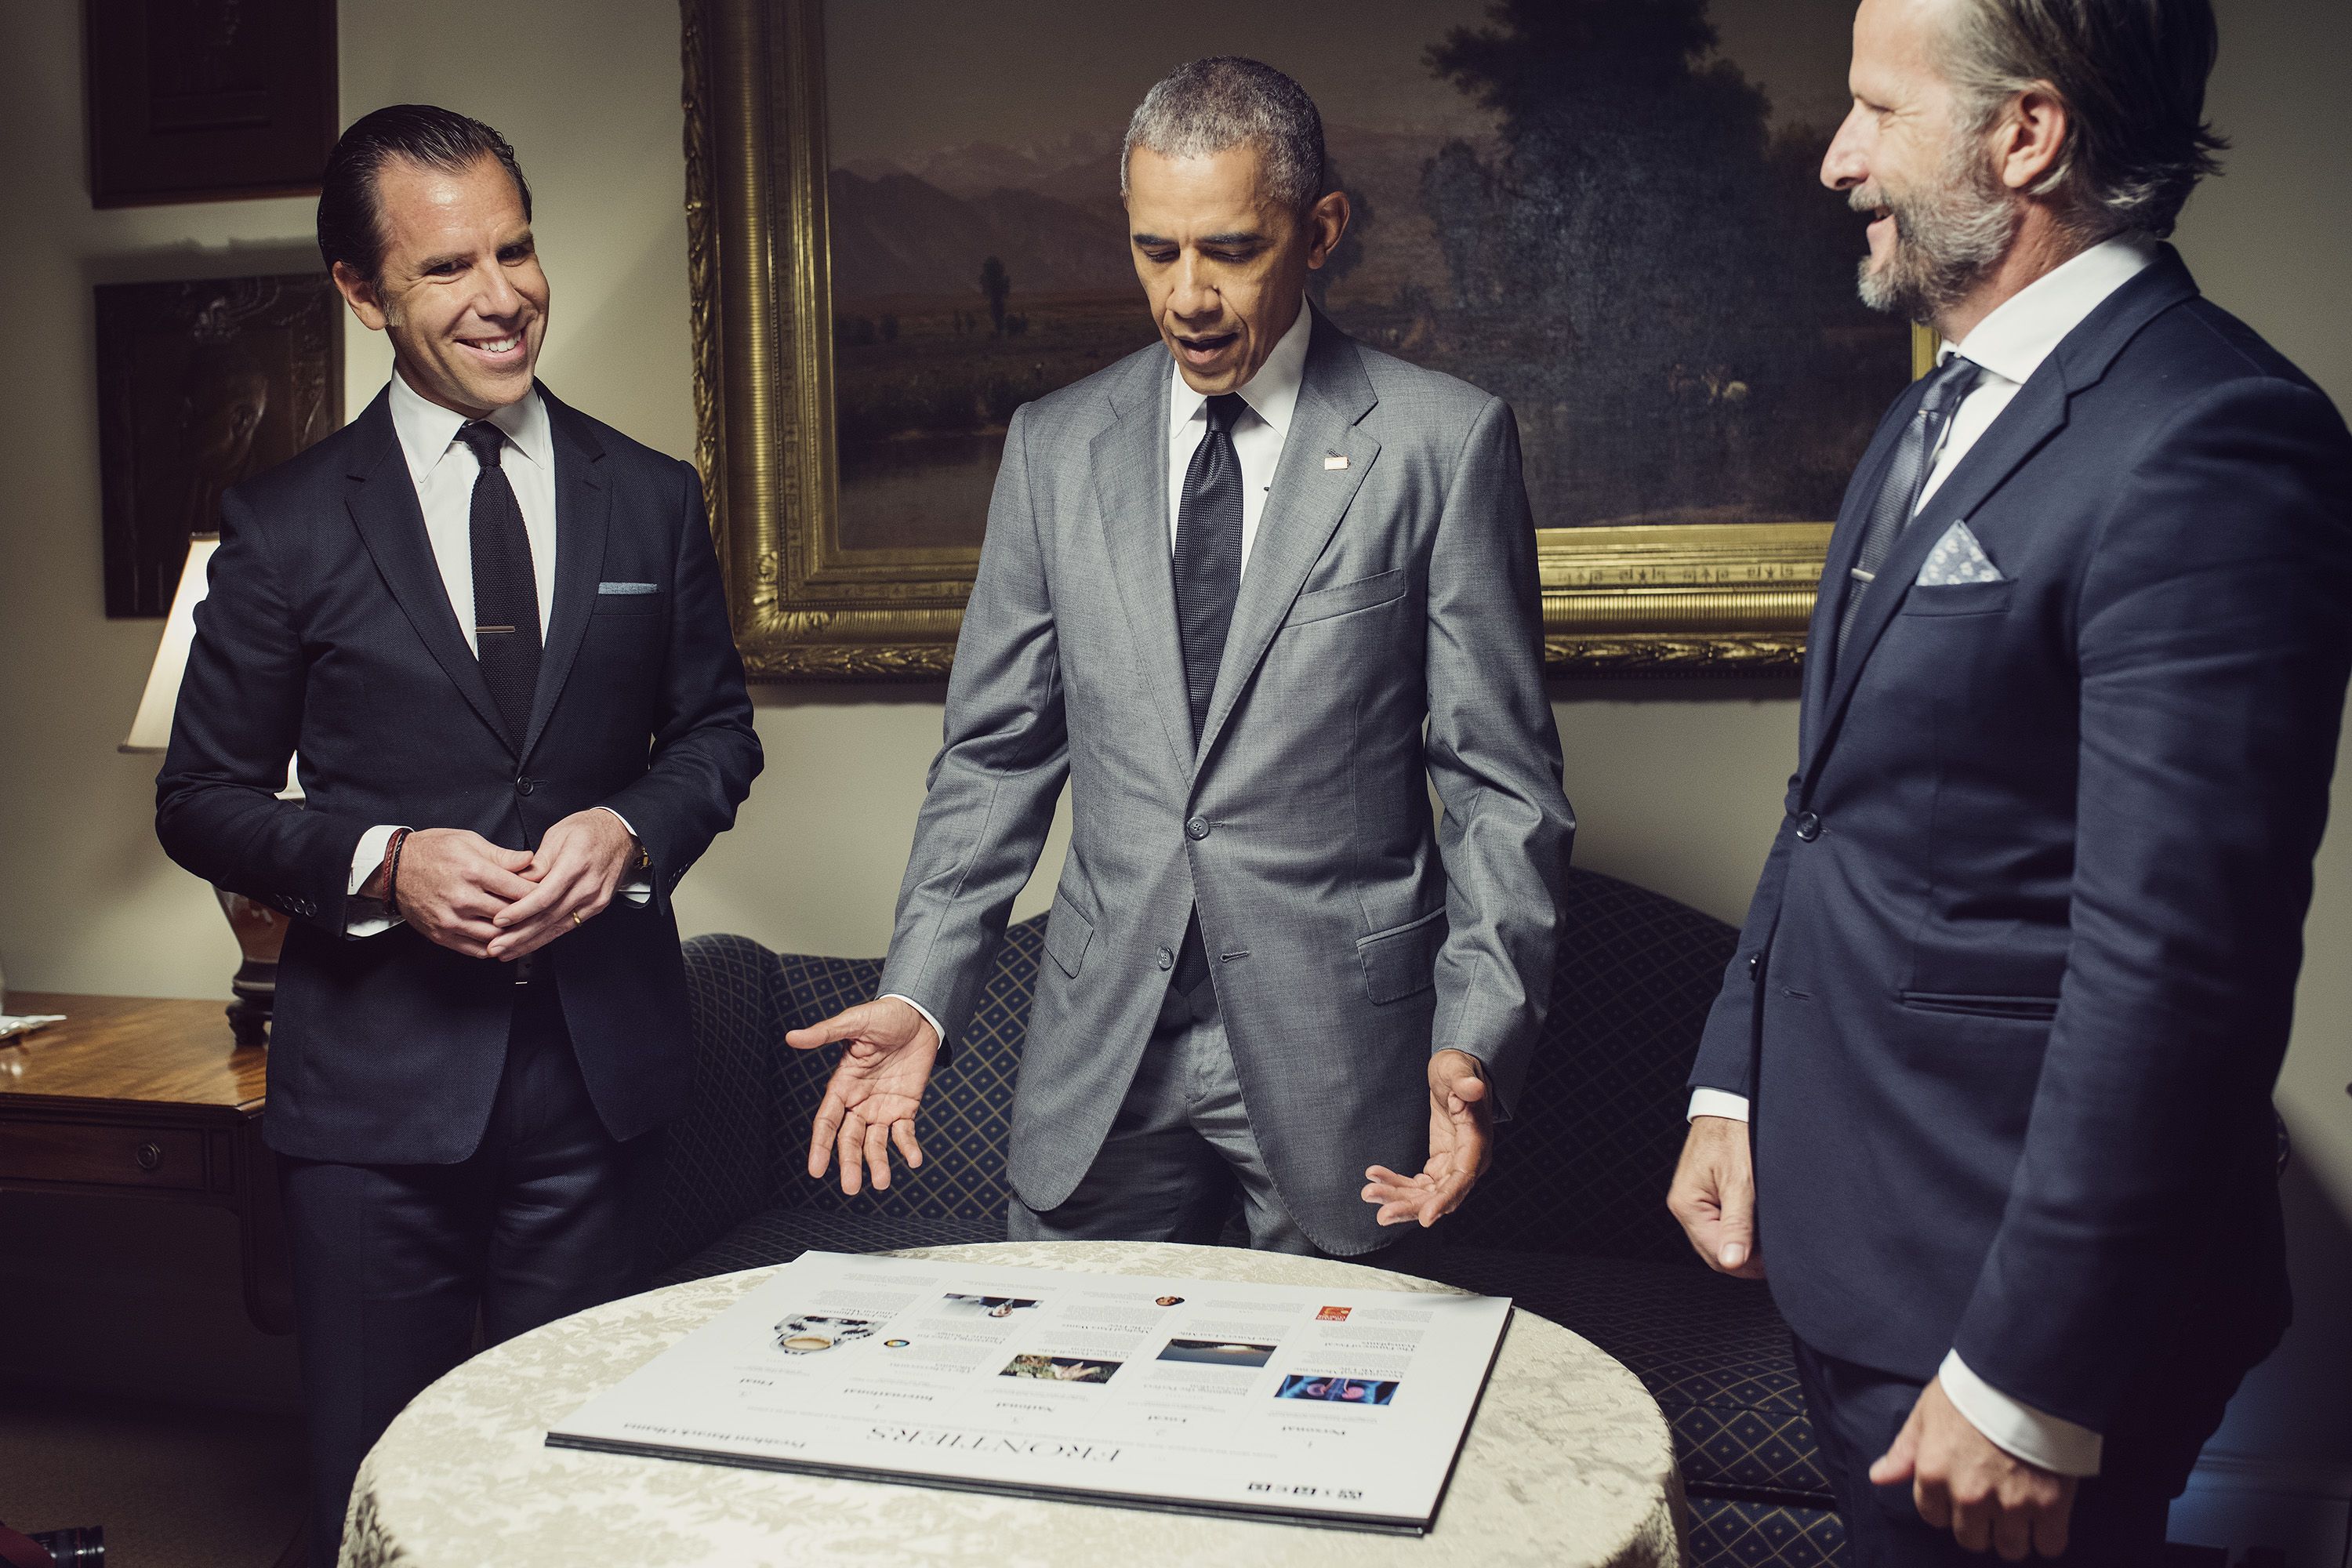 President Barack Obama reviews layout boards in the Roosevelt Room with Wired Magazine Editor in Chief Scott Dadich and Editorial Director Rob Capps for the issue he his guest editing.